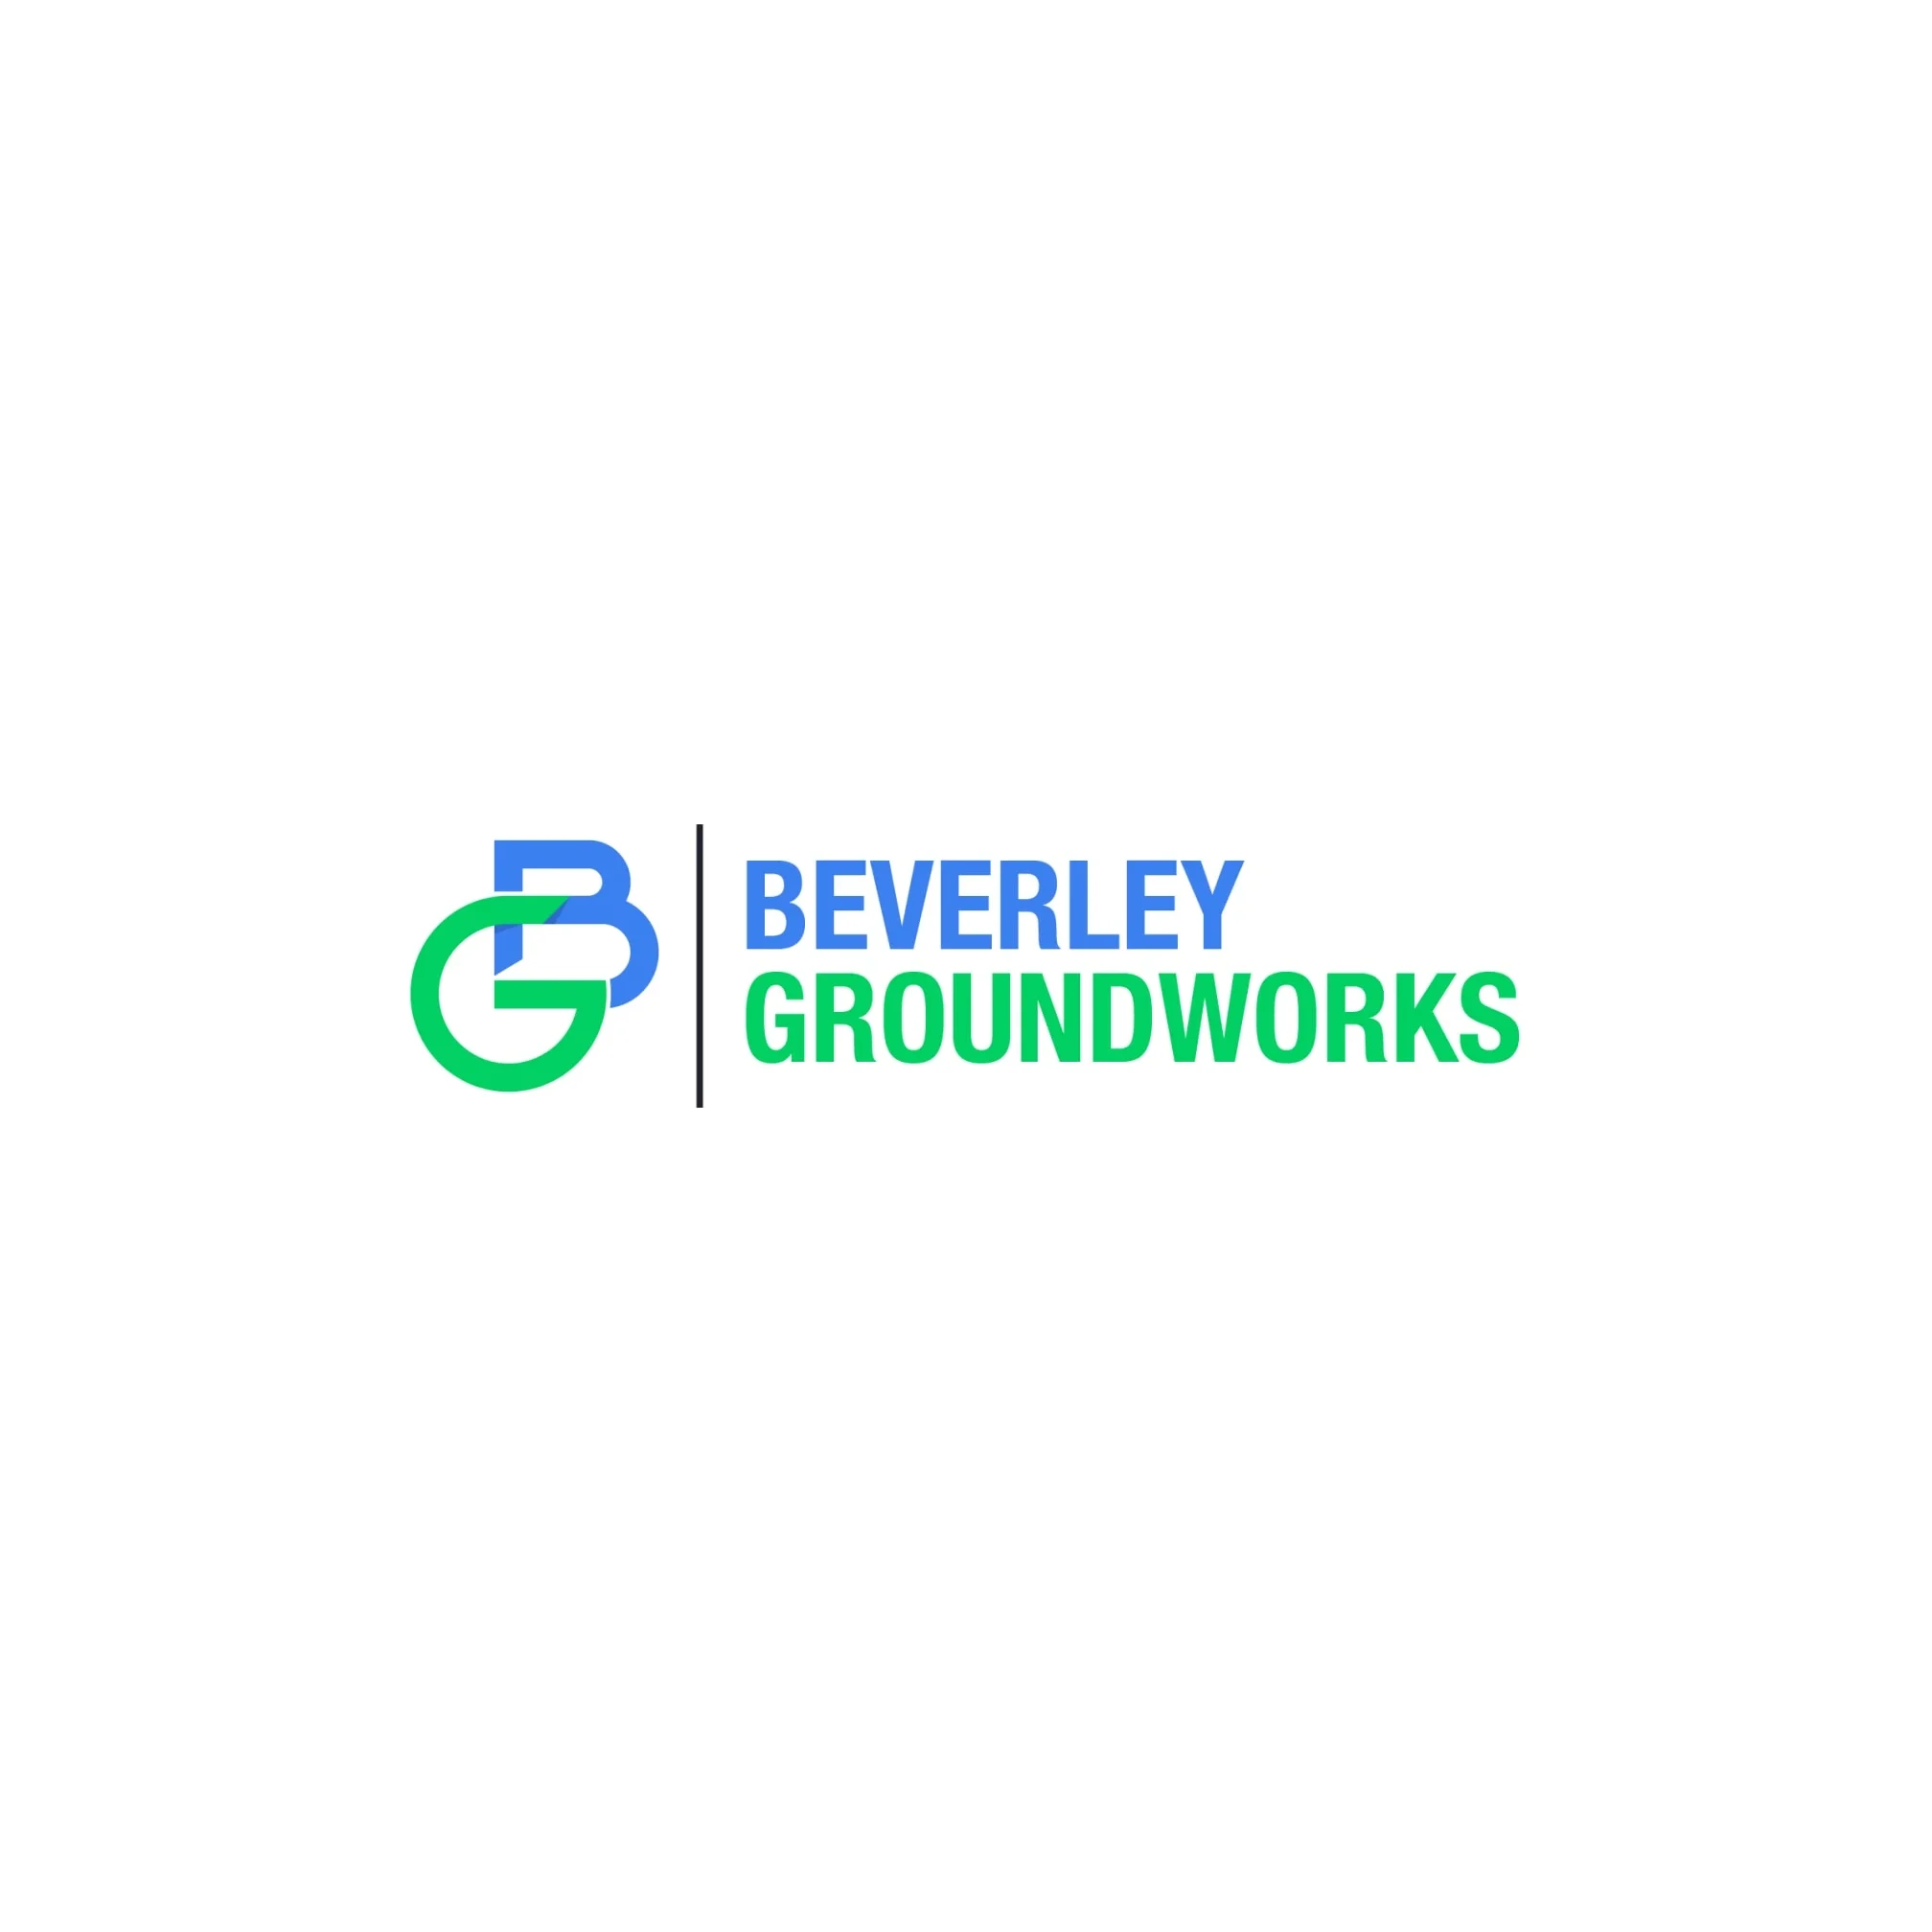 Beverley Groundworks - Hull, East Riding of Yorkshire HU5 5YT - 07770 057006 | ShowMeLocal.com